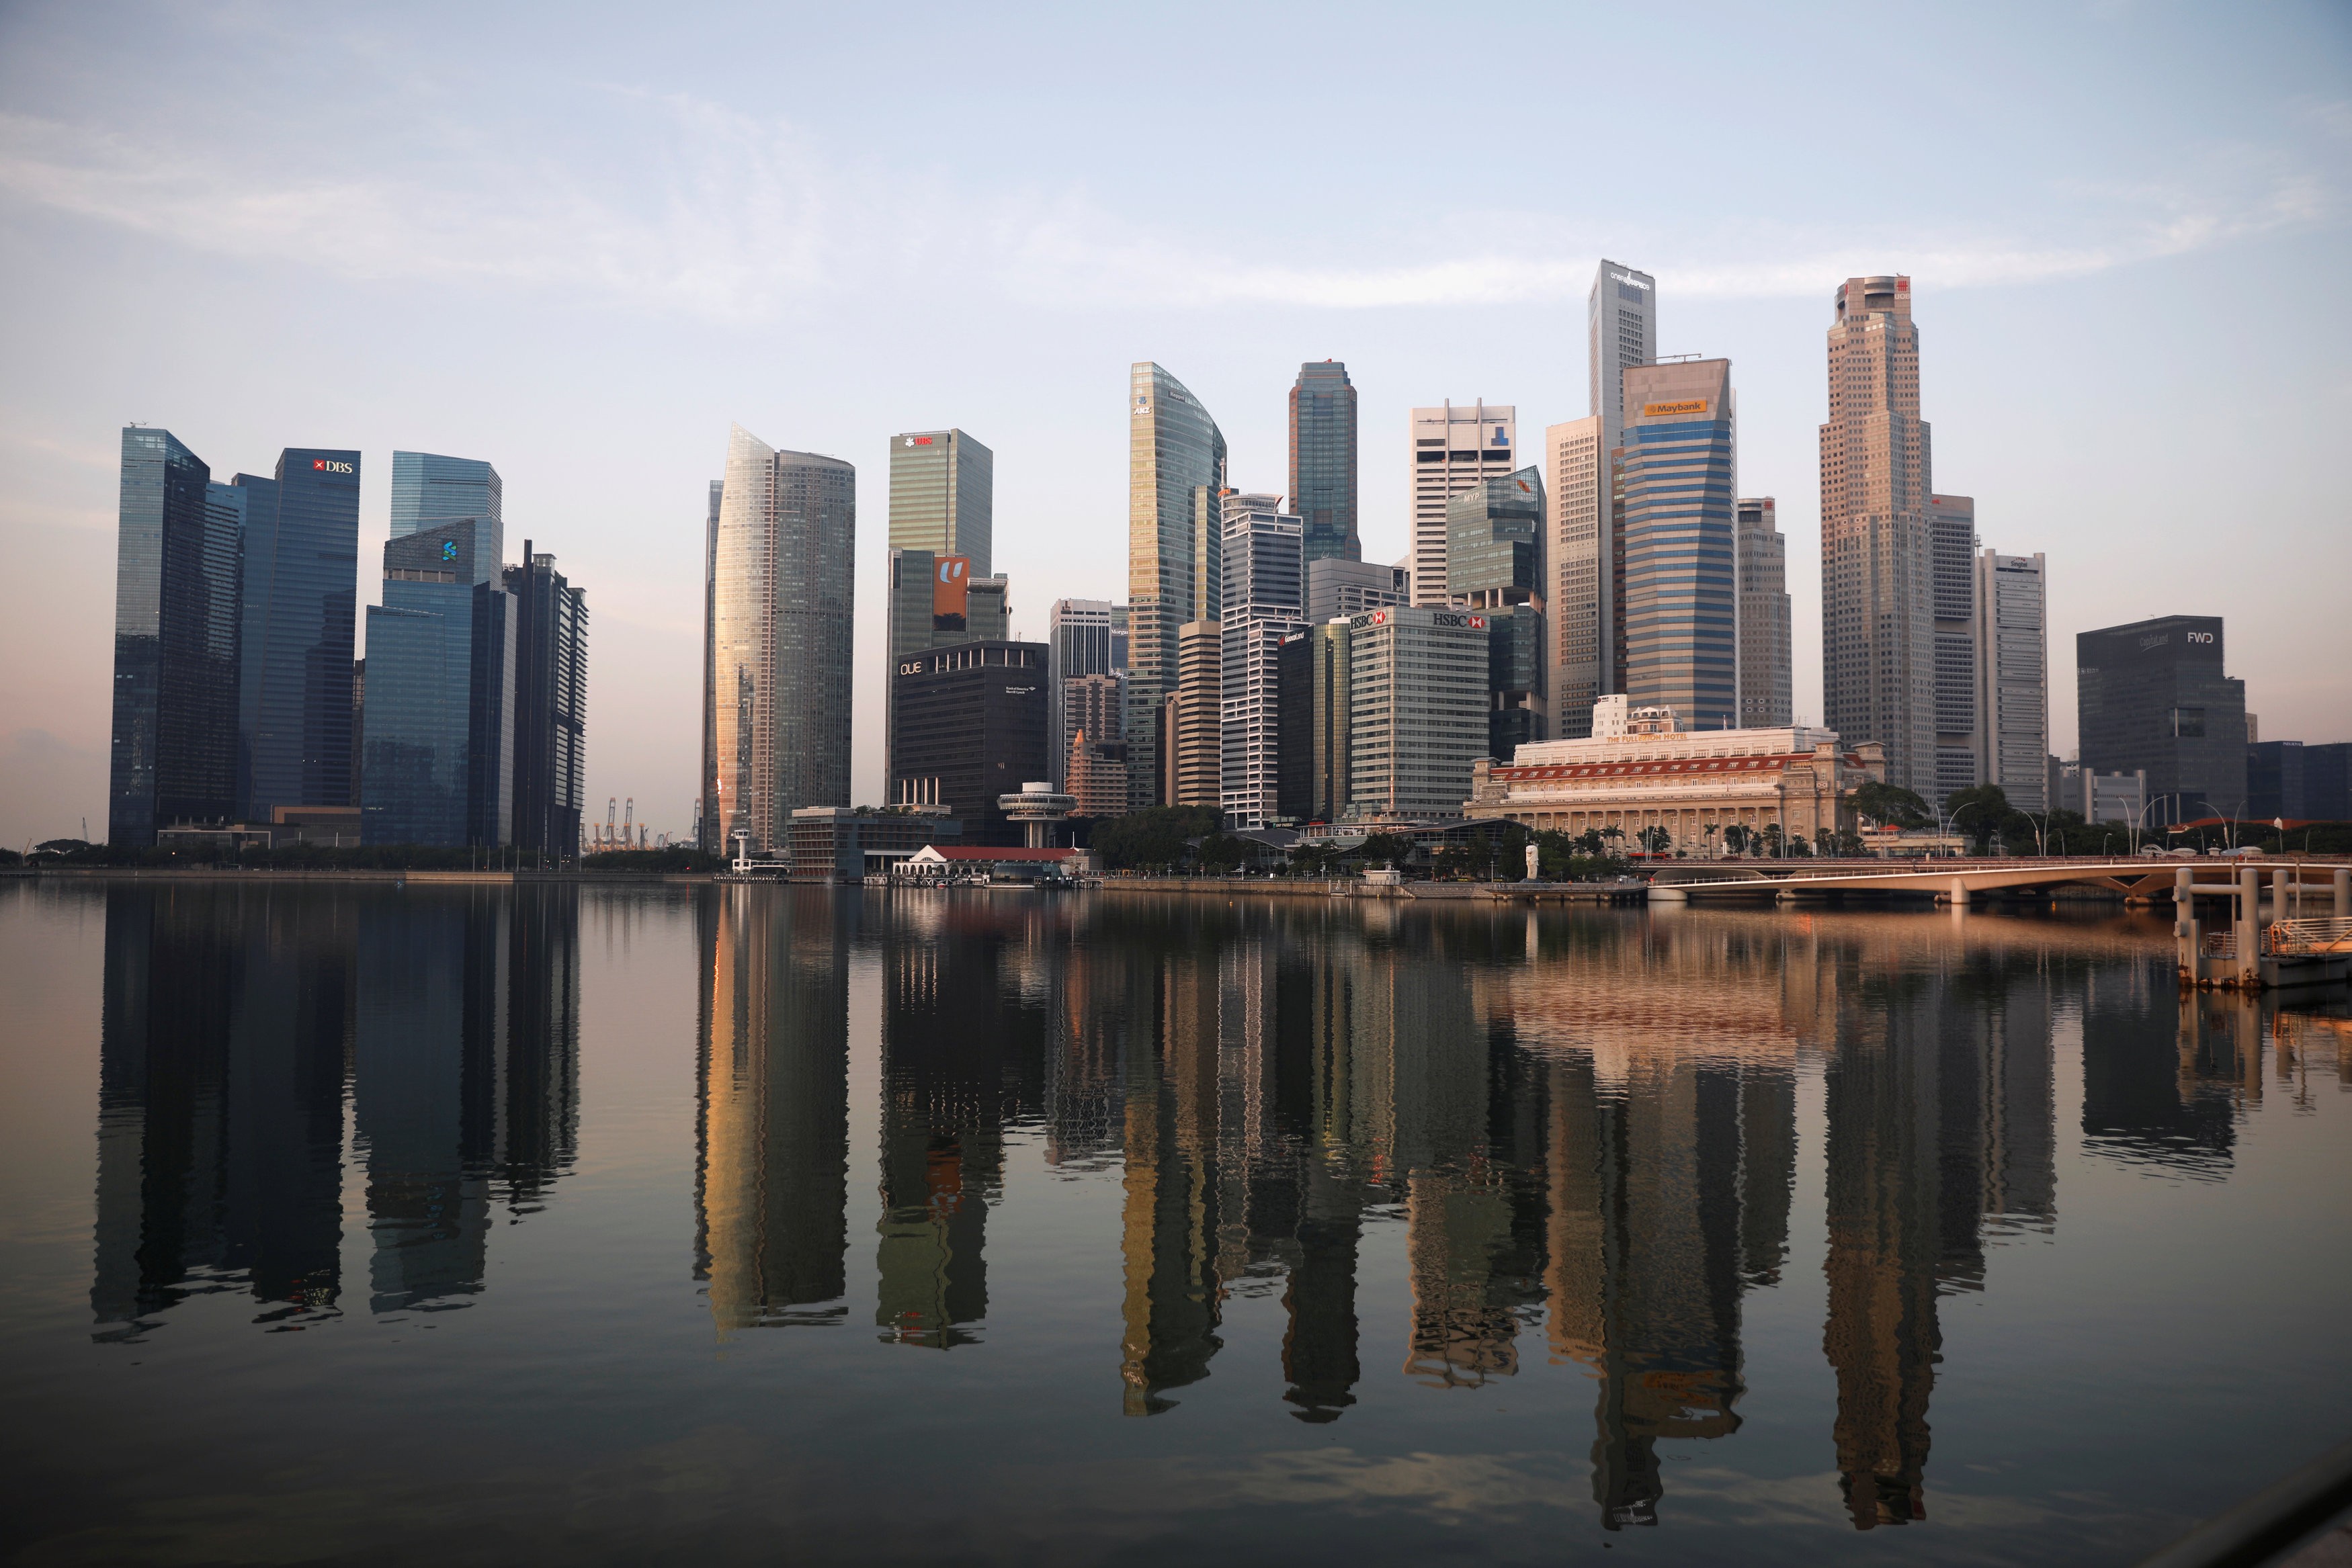 Singapore-listed Best World International is alleged to have engaged in questionable sales and accounting practices. Photo: Reuters